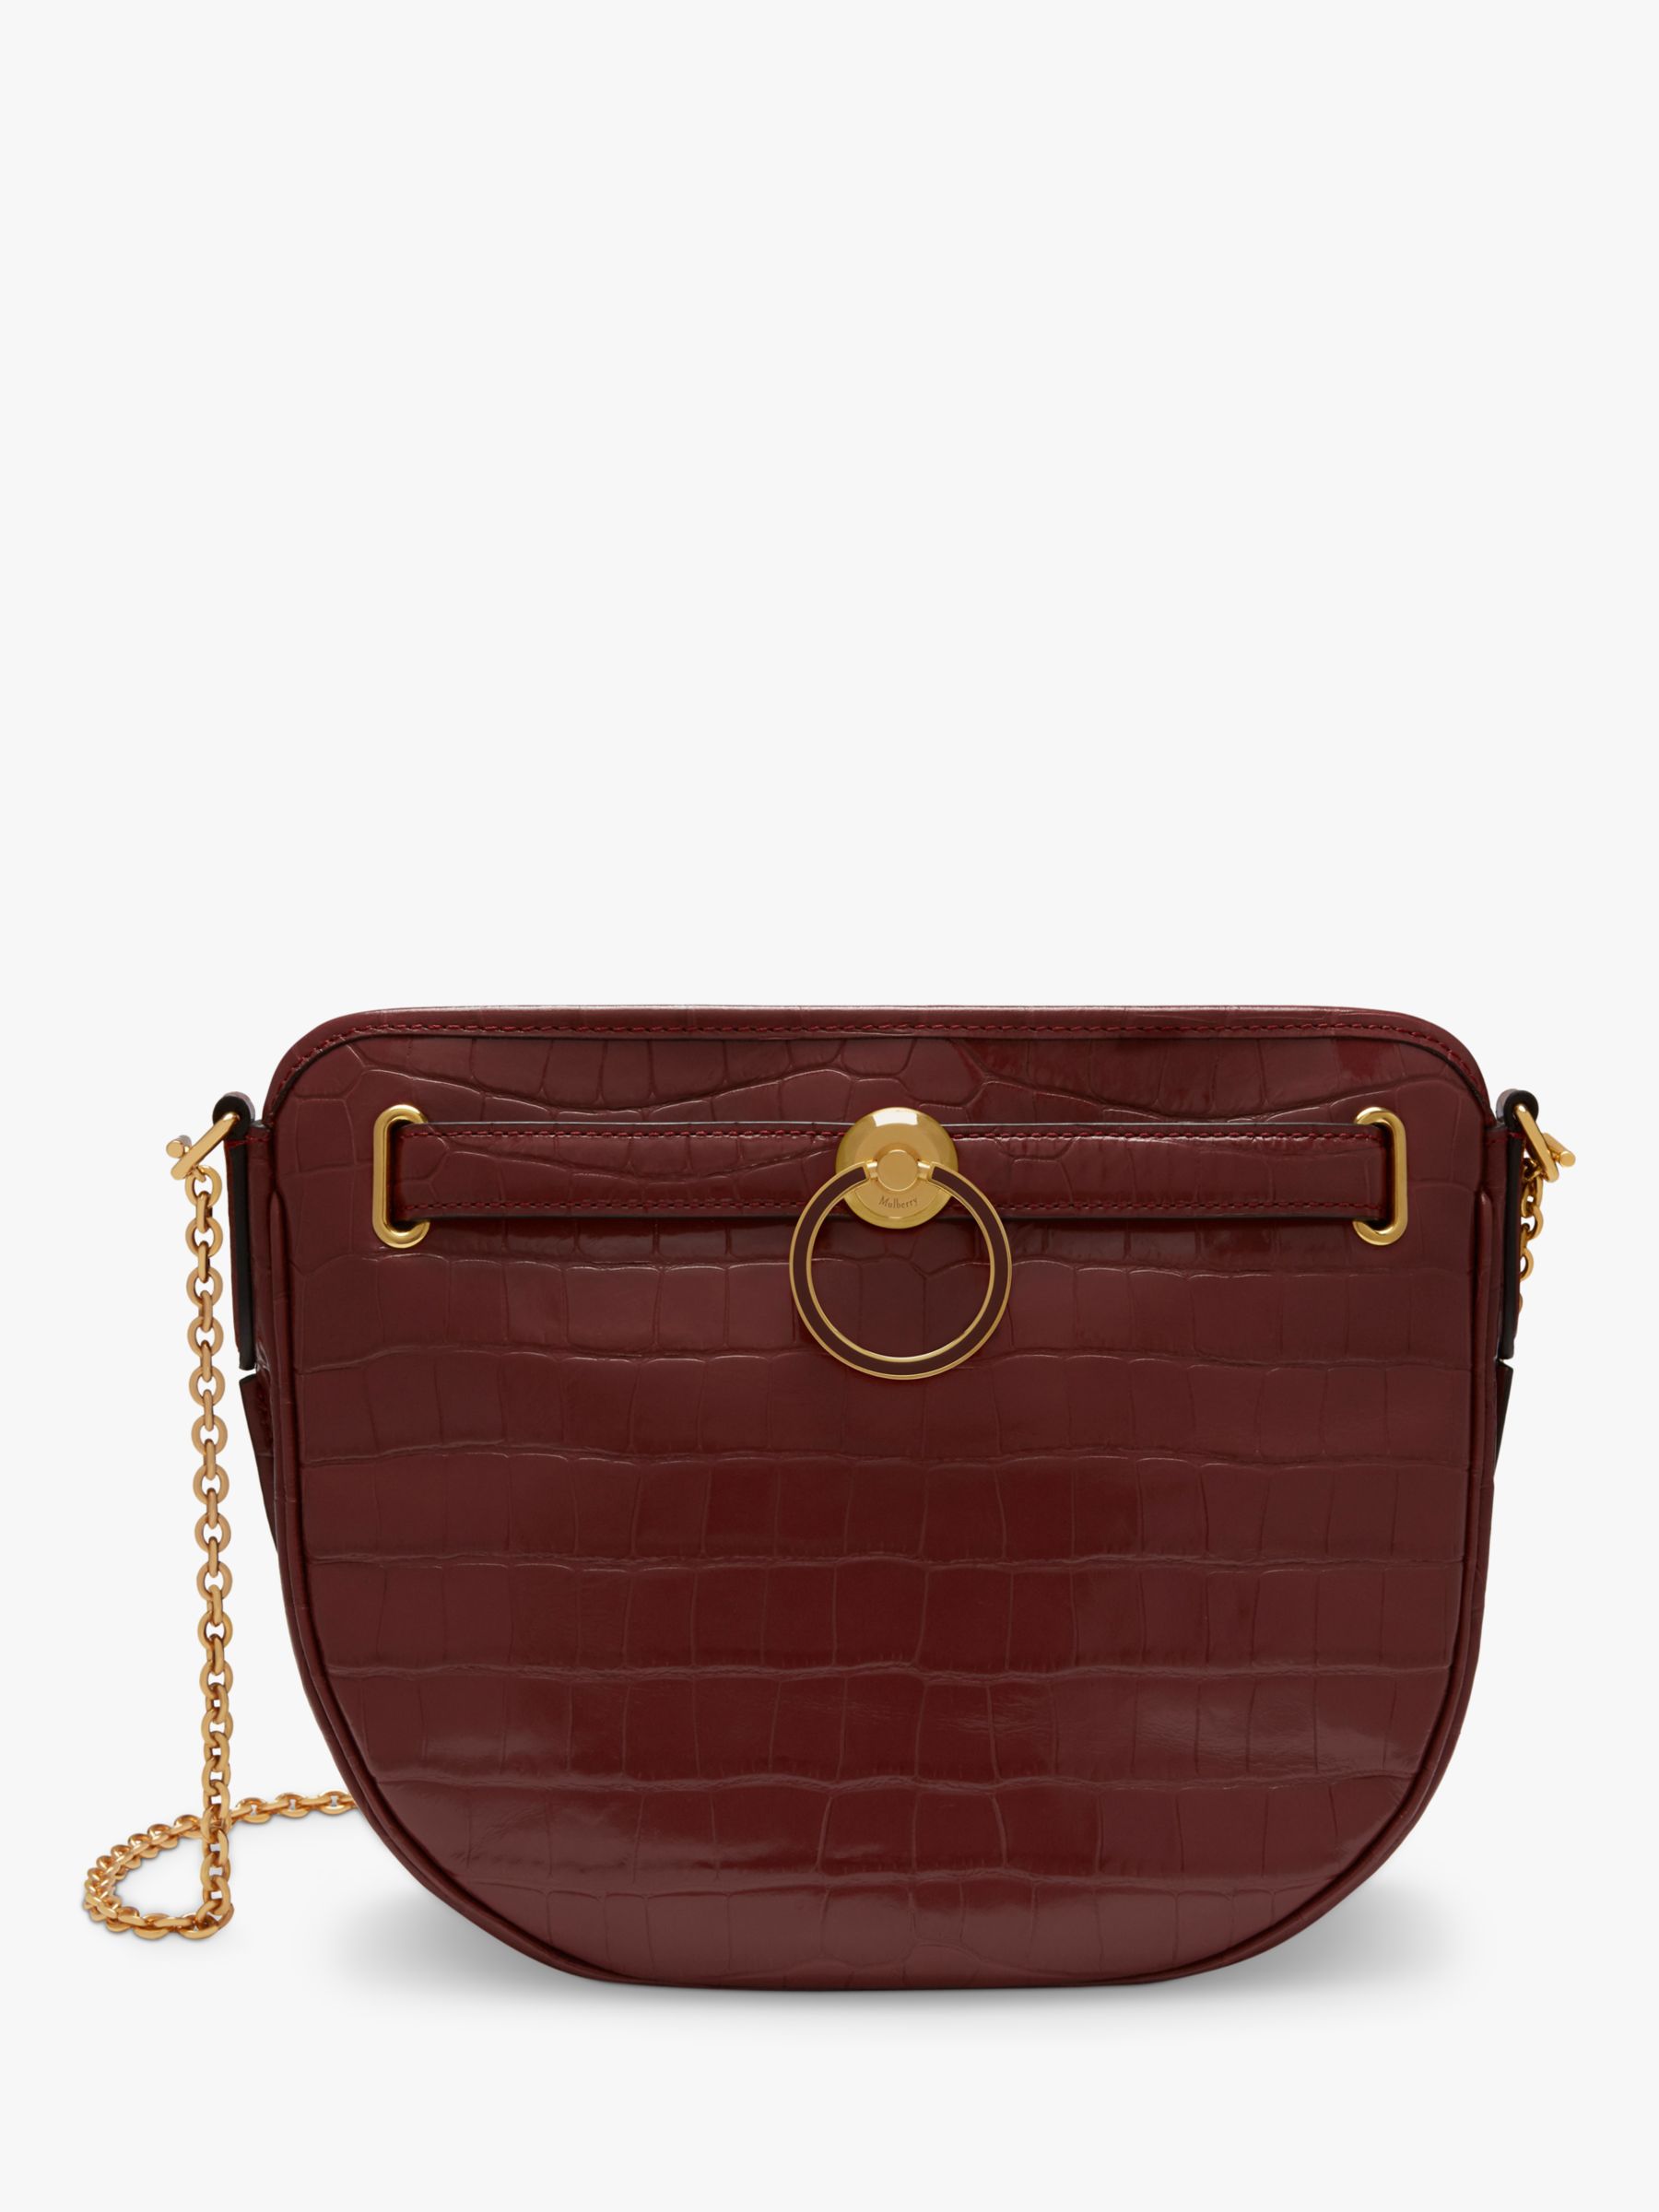 Mulberry Brockwell Croc Embossed Leather Satchel Bag at John Lewis ...